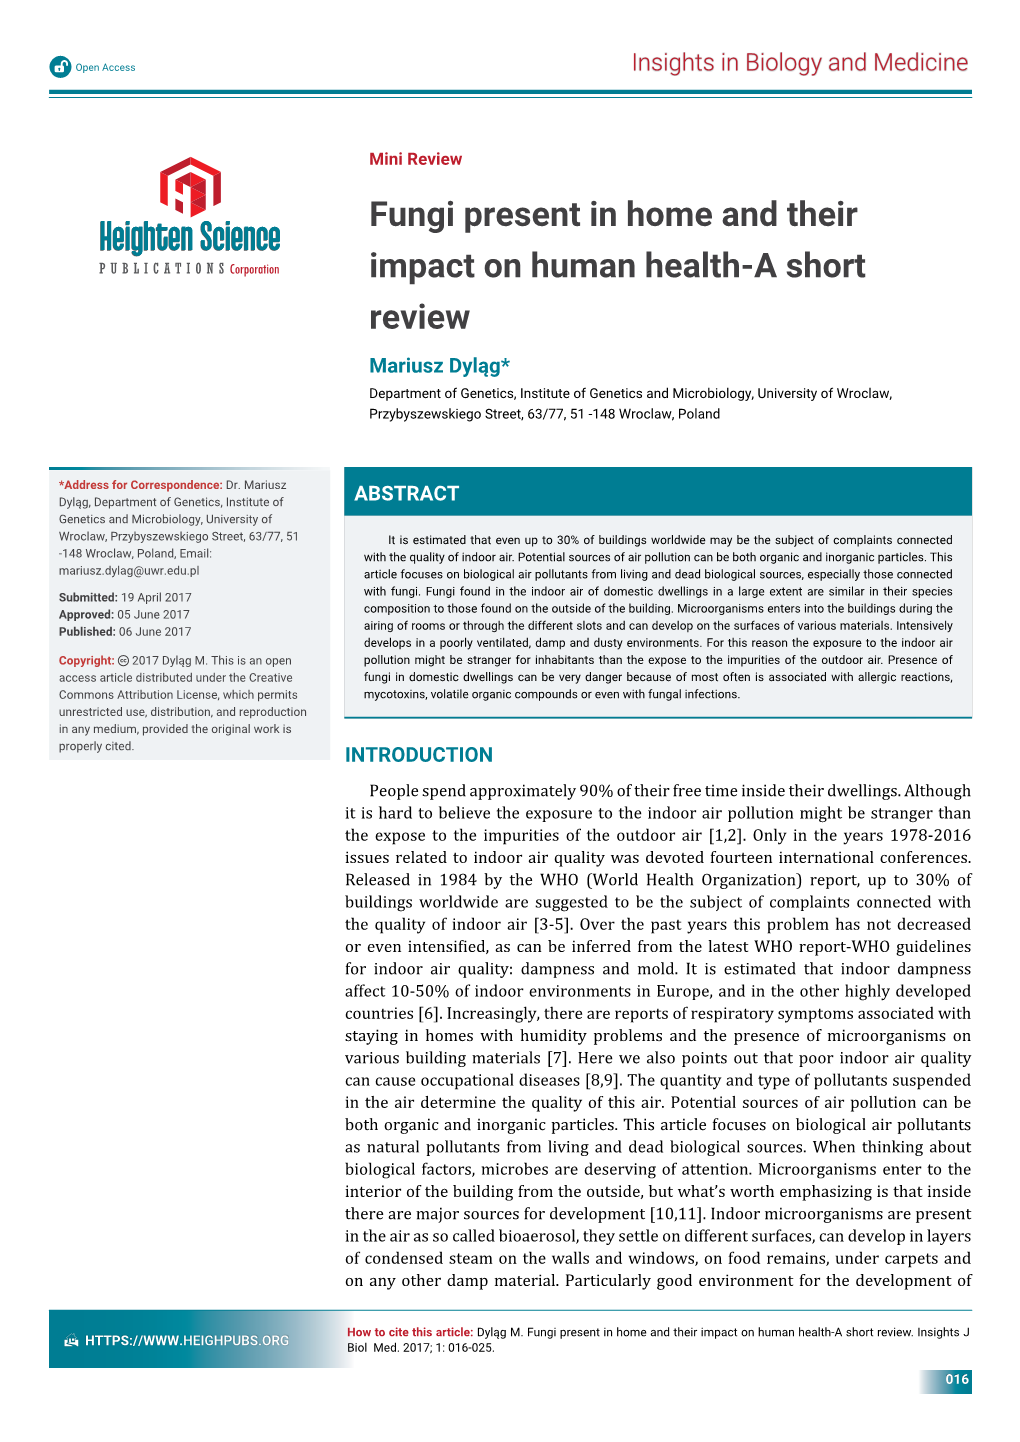 Fungi Present in Home and Their Impact on Human Health-A Short